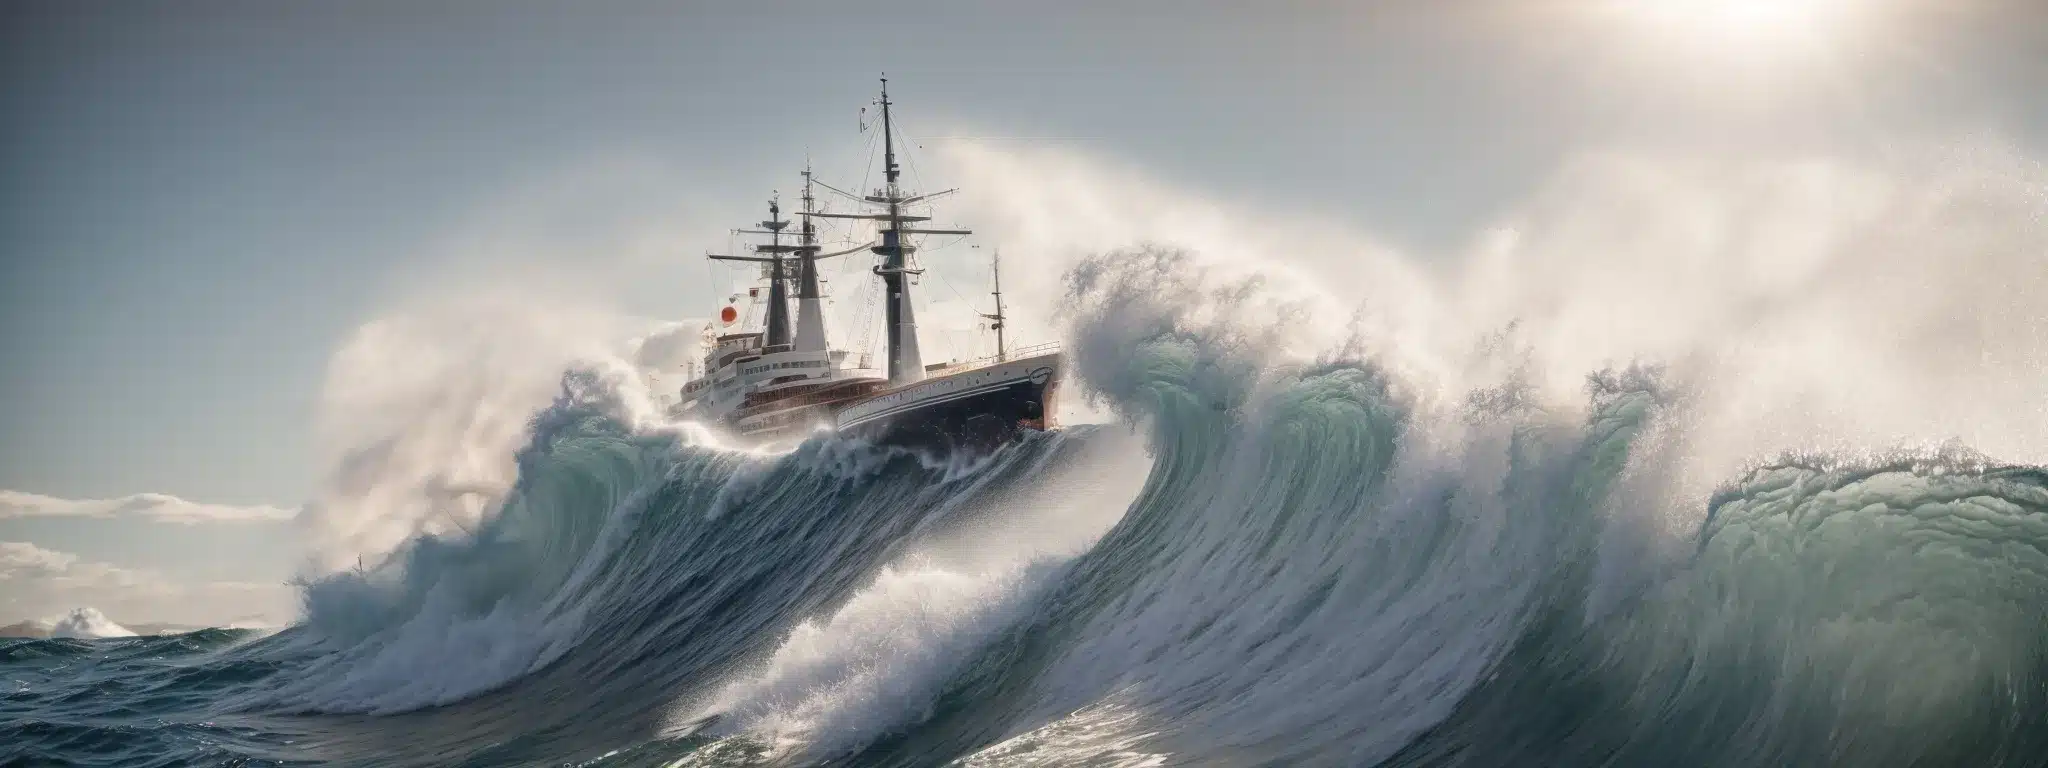 A Ship Navigating Turbulent Ocean Waves With A Compass On A Sunlit Deck.